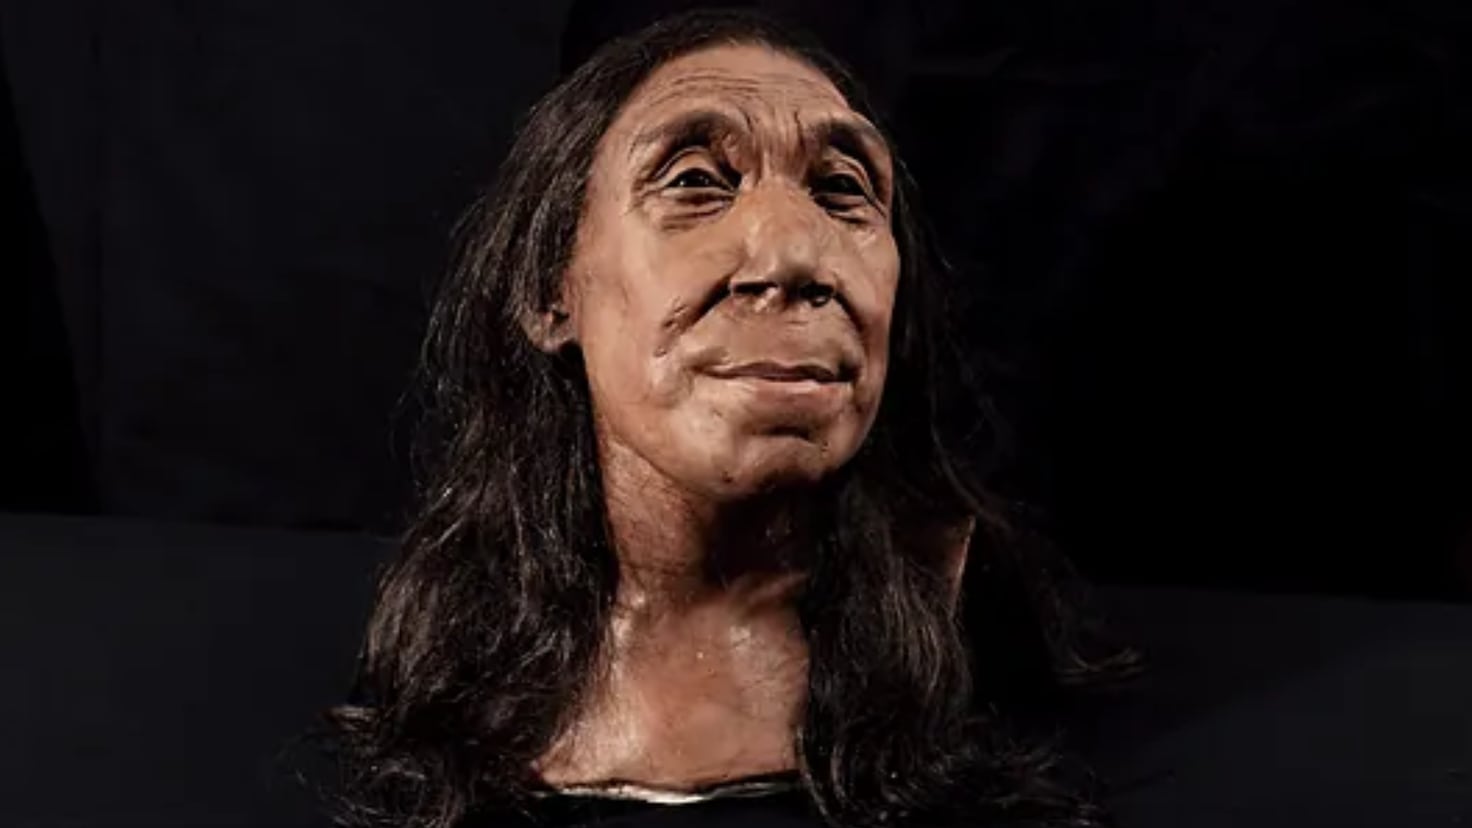 They reconstruct what the face of a Neanderthal woman looked like from 75,000 years ago
